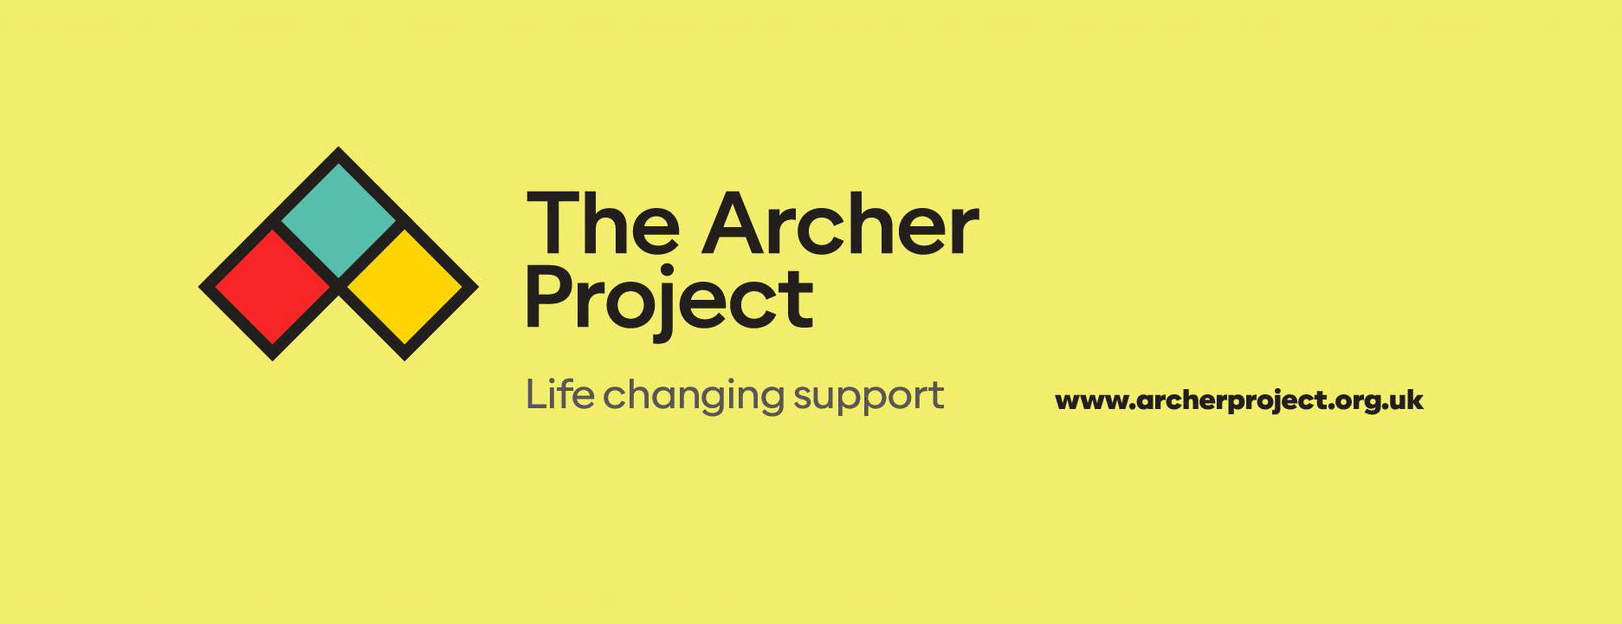 The Archer Project case study